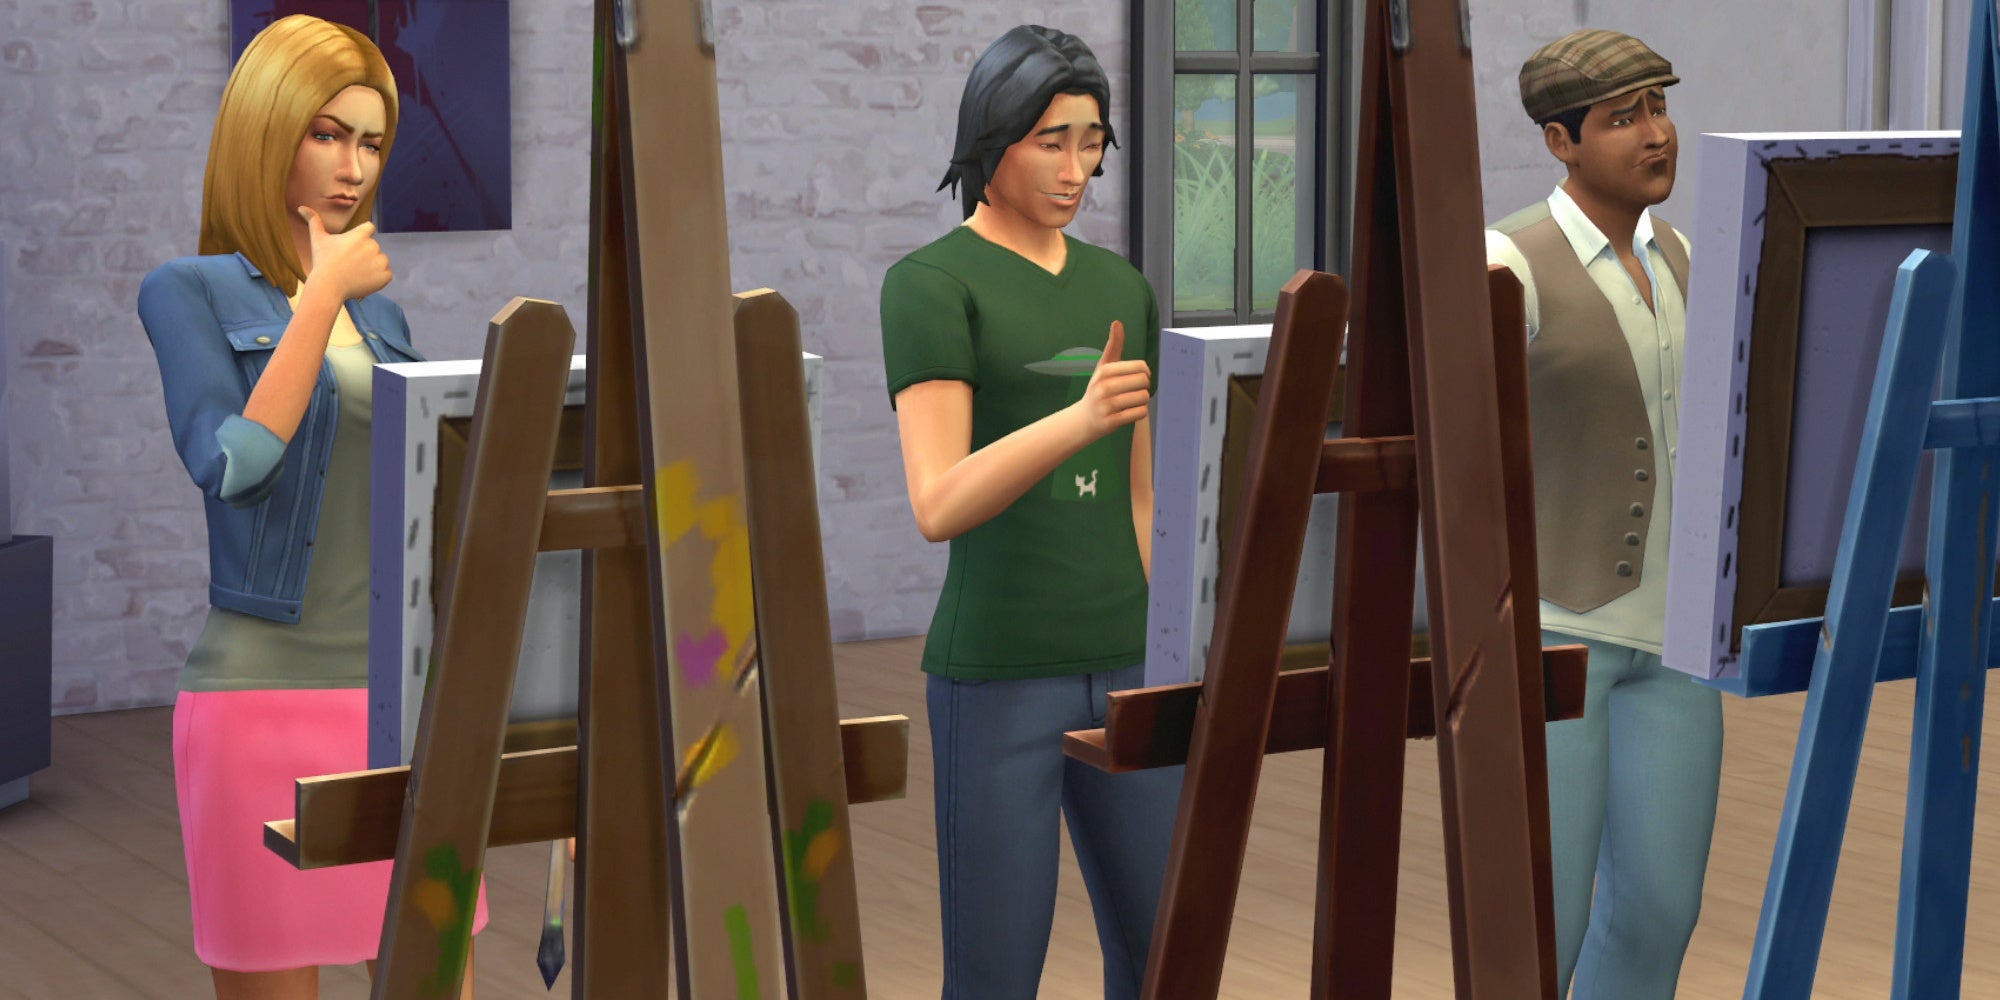 Sims are working on their paintings in The Sims 4.